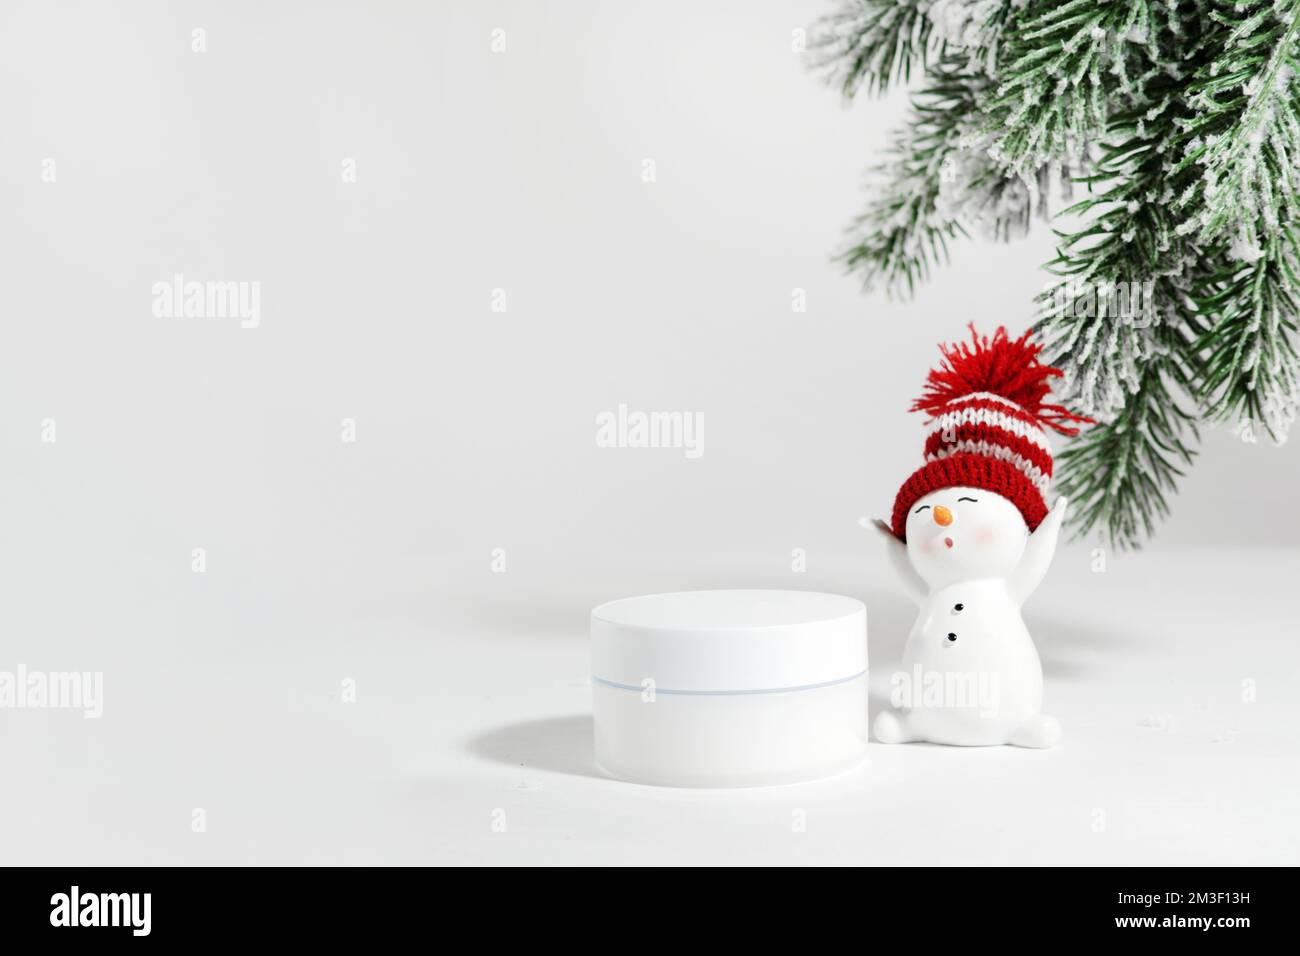 White jar of skin care cosmetics on a white surface with a snowman. Winter cosmetics. Empty container with fir branches background. Christmas gift ide Stock Photo